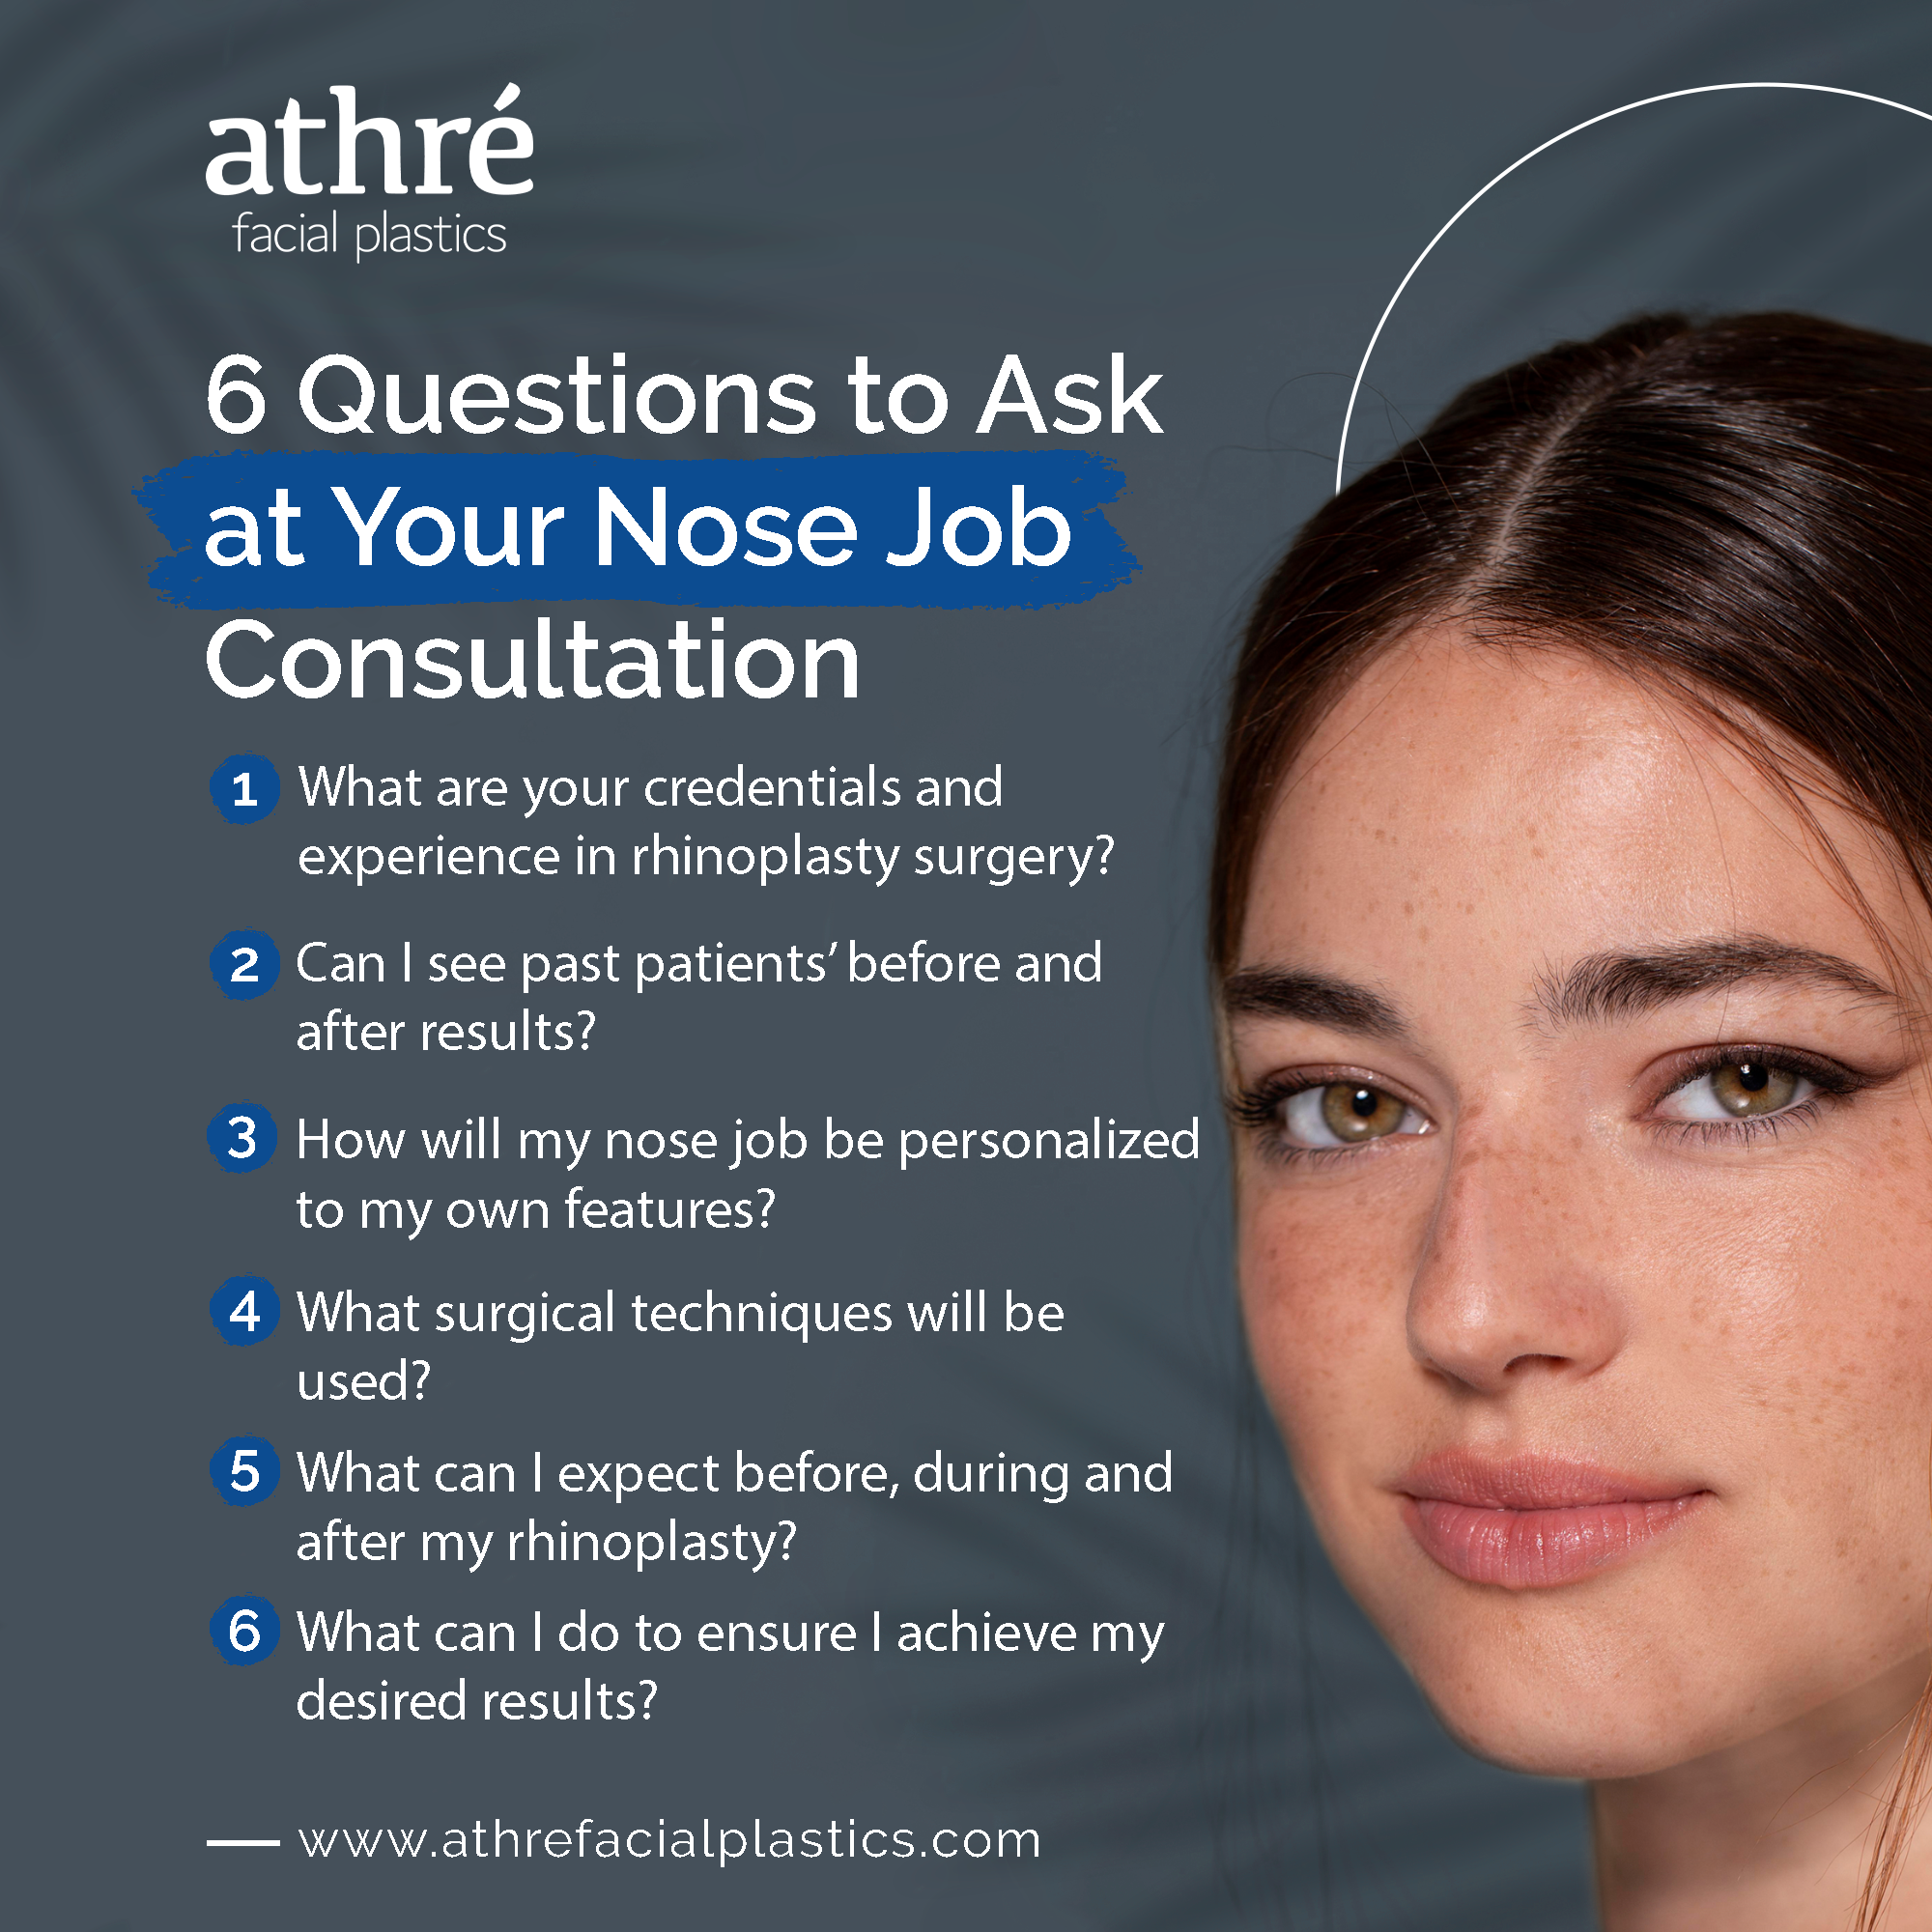 6 Questions to Ask at Your Nose Job Consultation